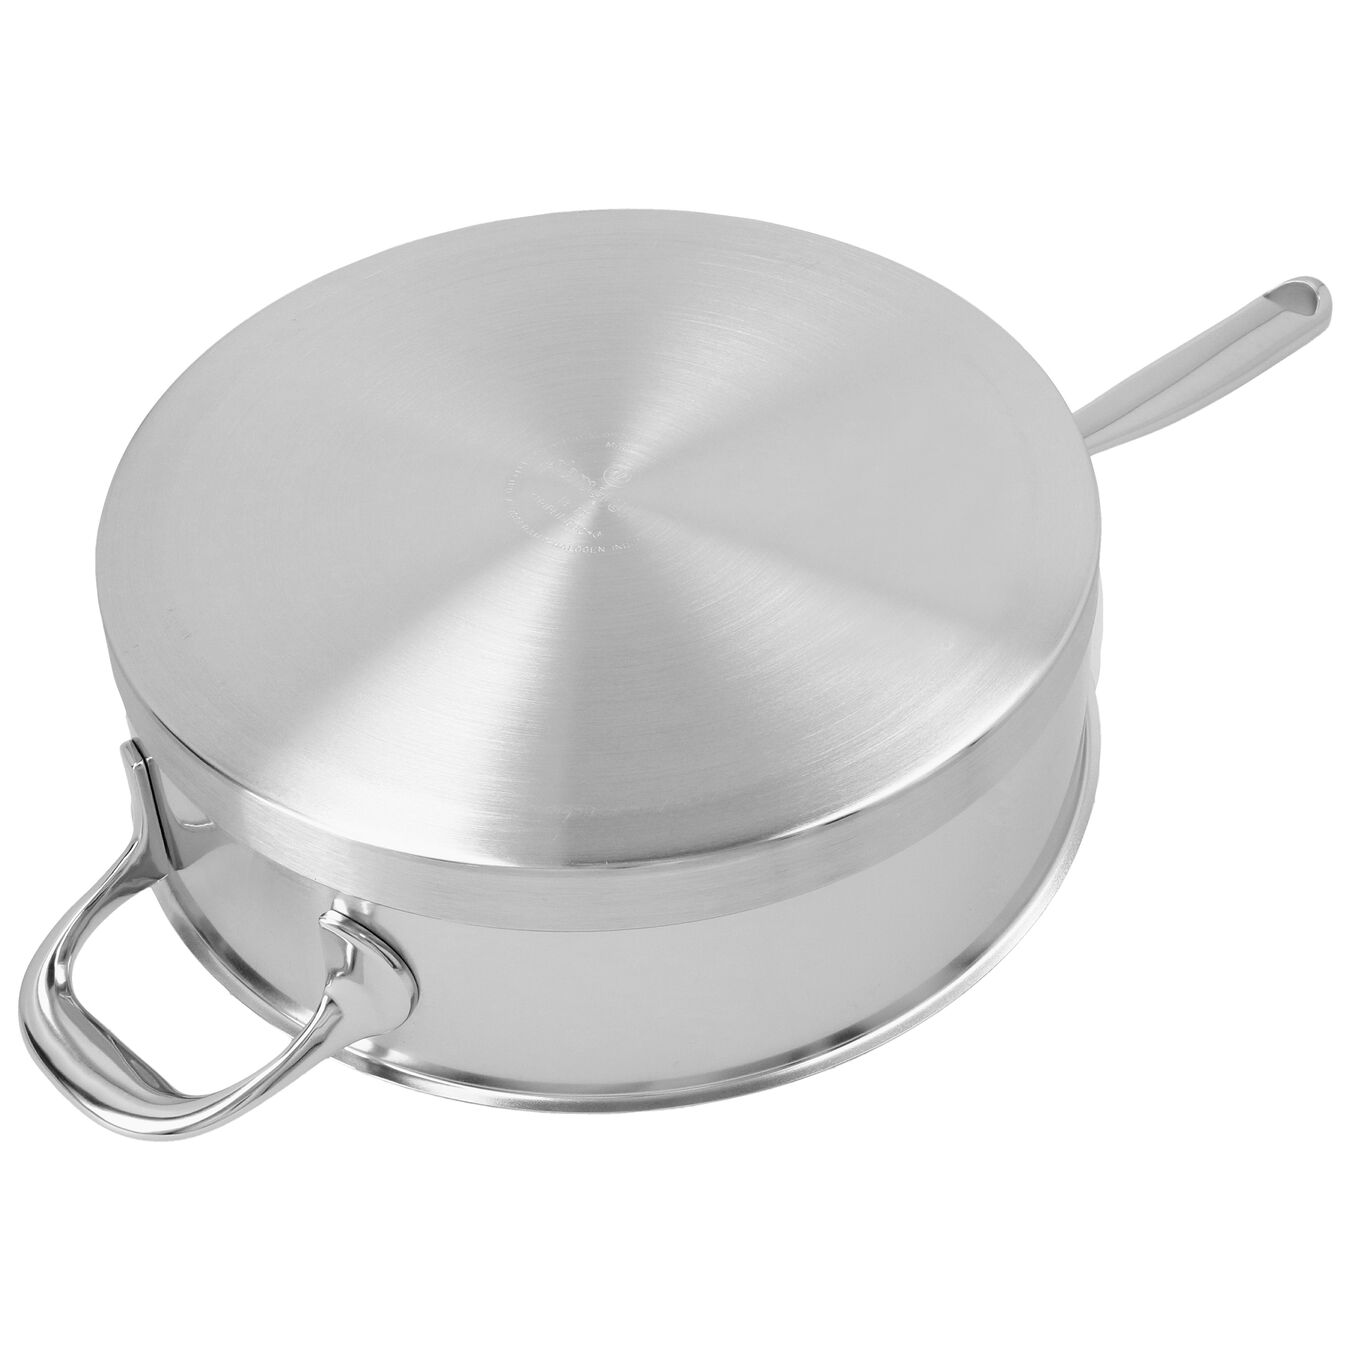 28 cm round 18/10 Stainless Steel Saute pan with lid silver,,large 6